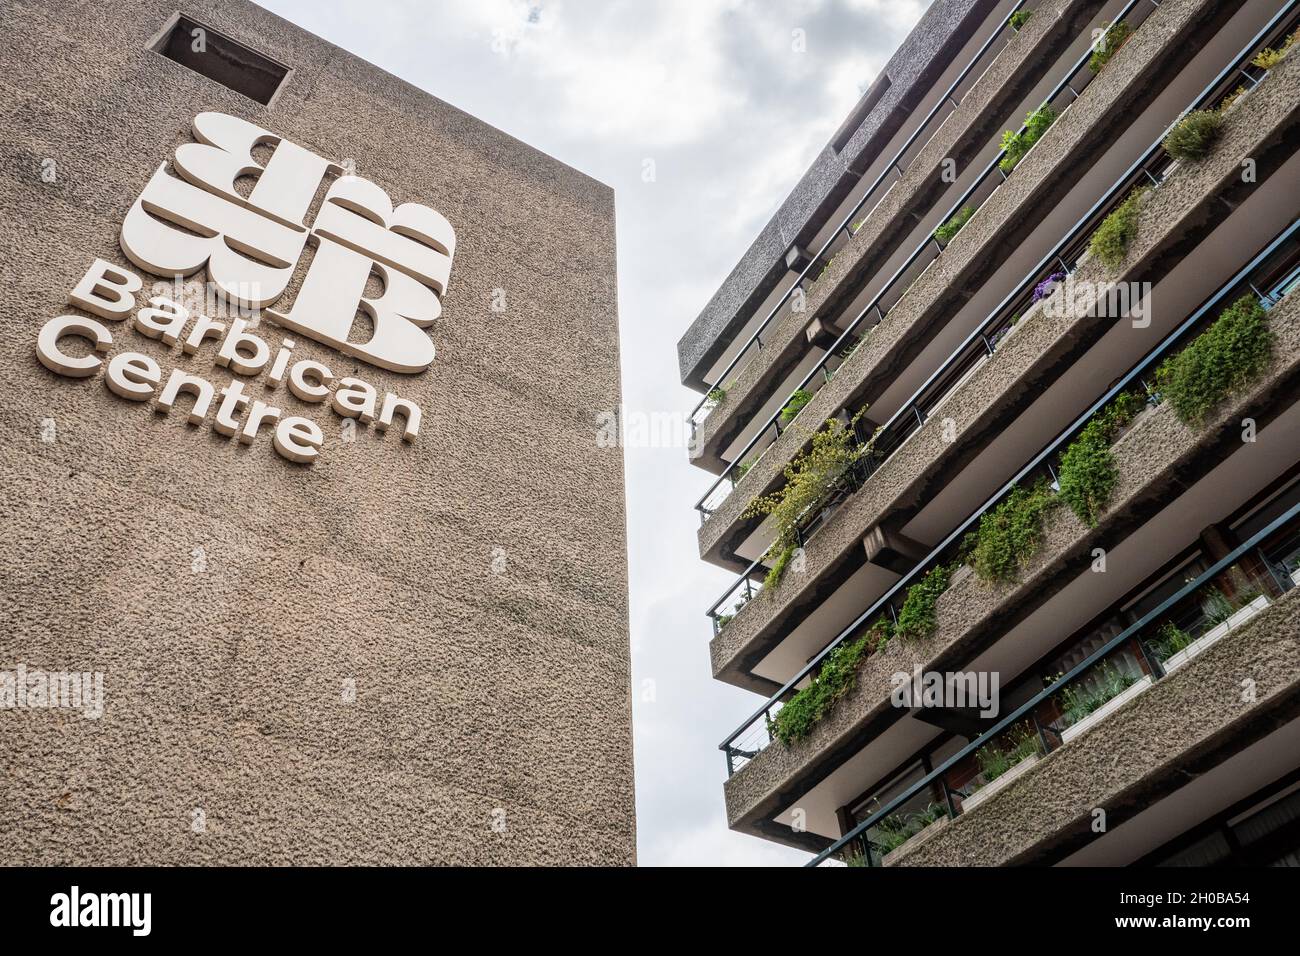 The Barbican Centre, London. The iconic brutalist concrete architecture of the inner city estate and eminent performing arts centre. Stock Photo